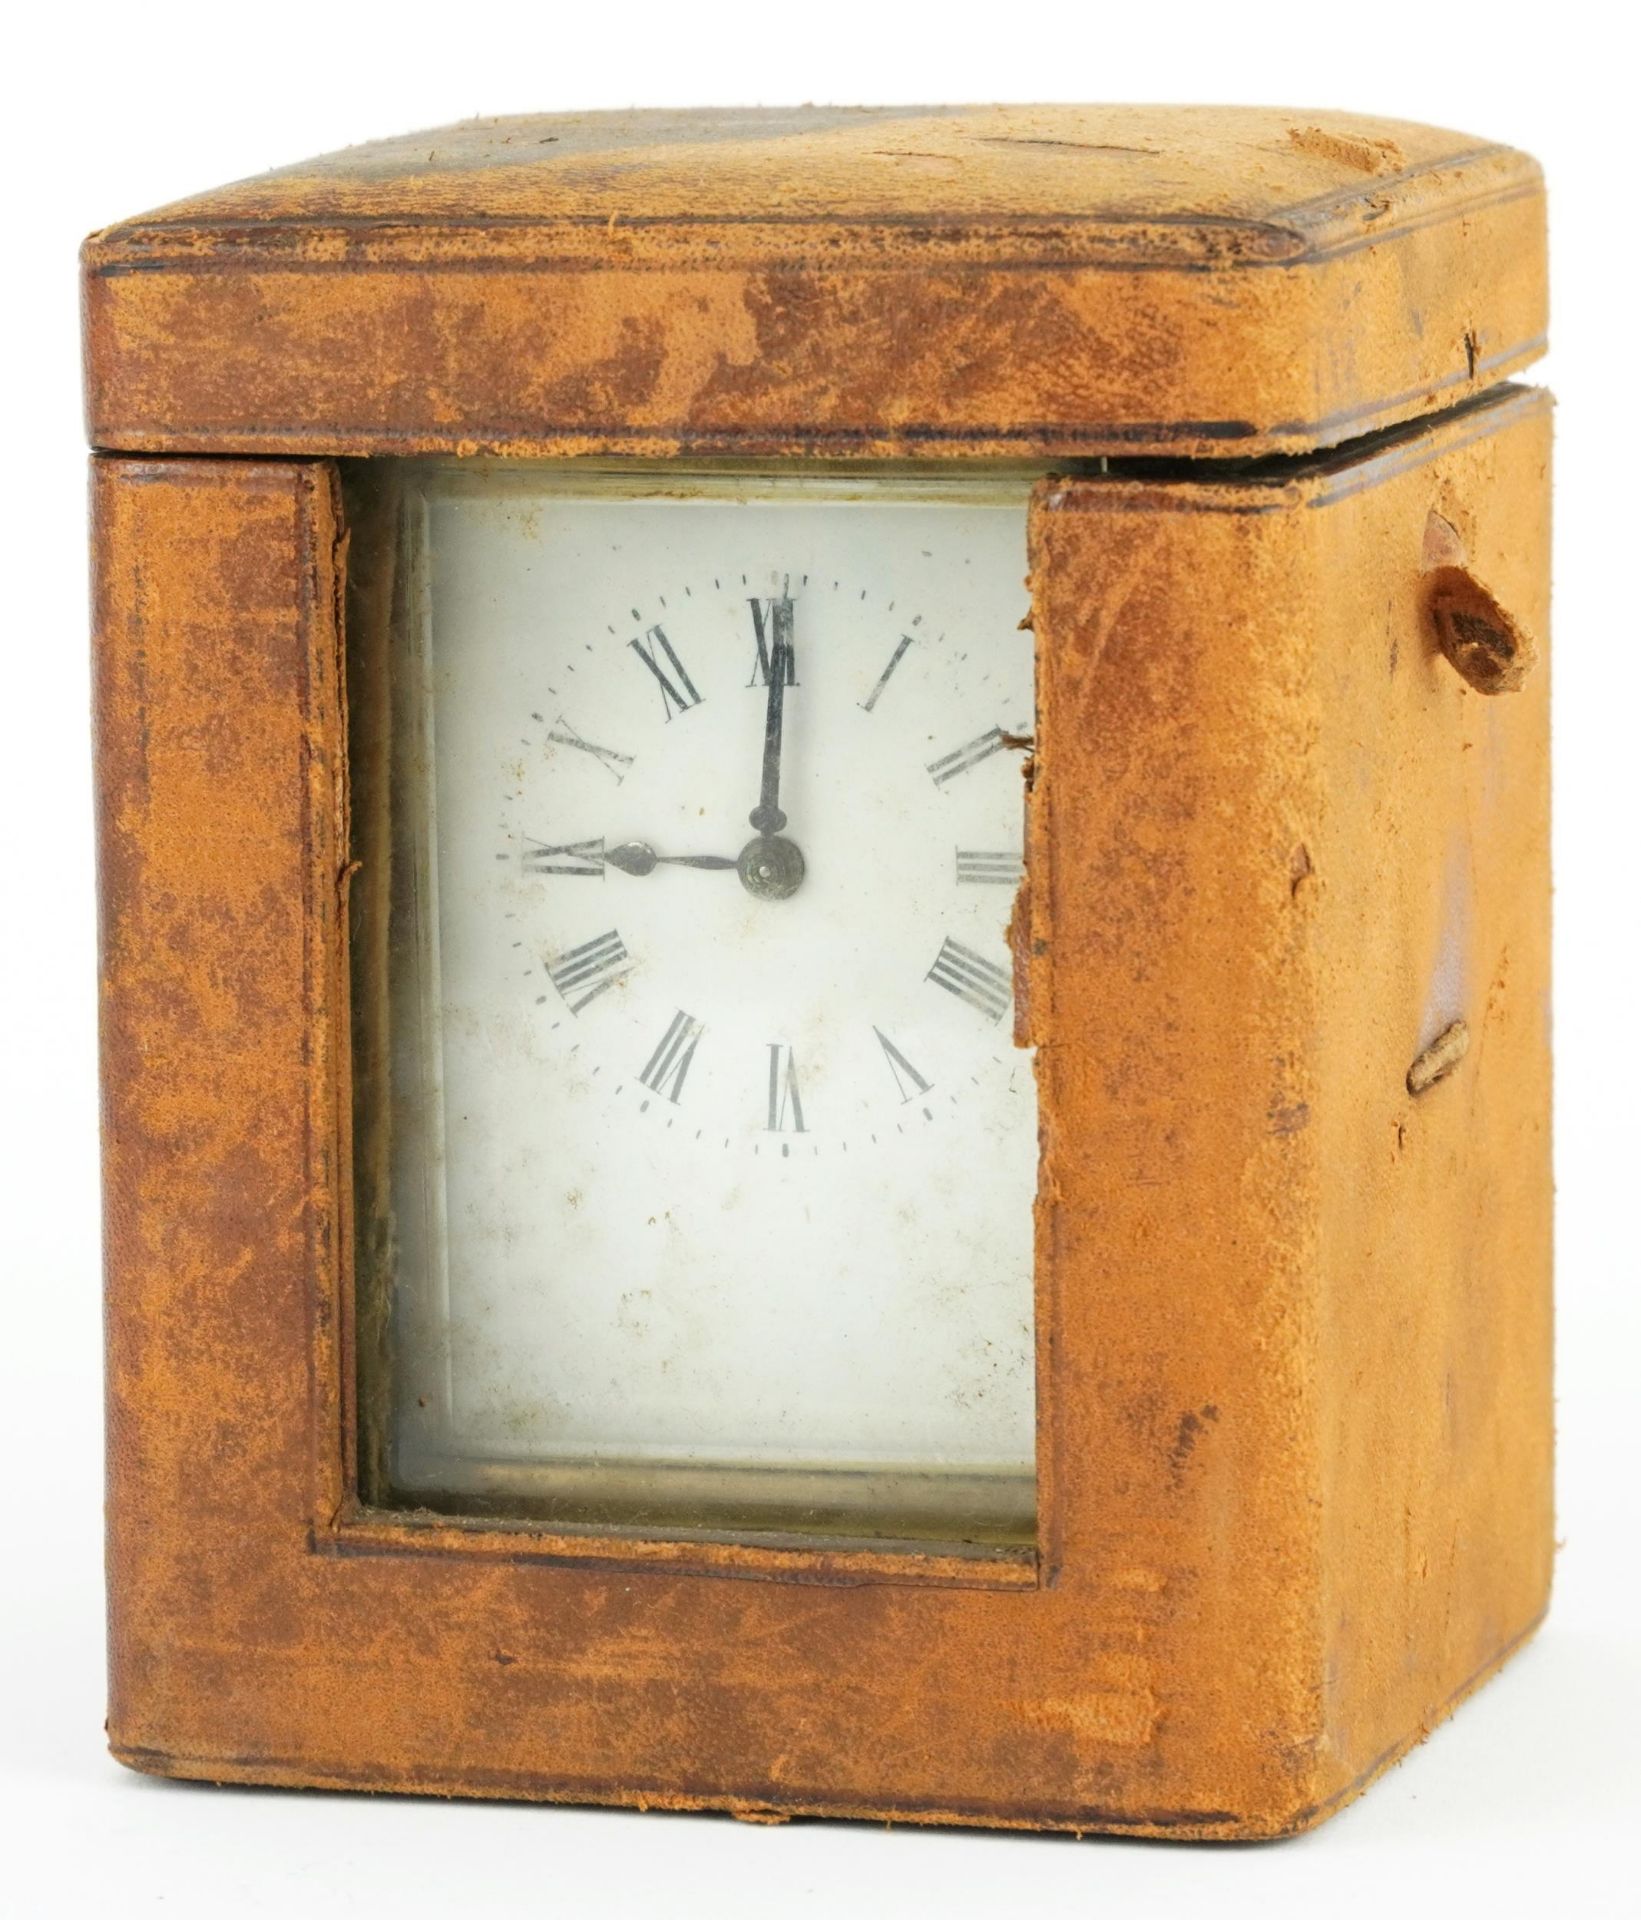 Richard & Co, 19th century French brass cased carriage clock with velvet lined leather travel case - Image 2 of 5